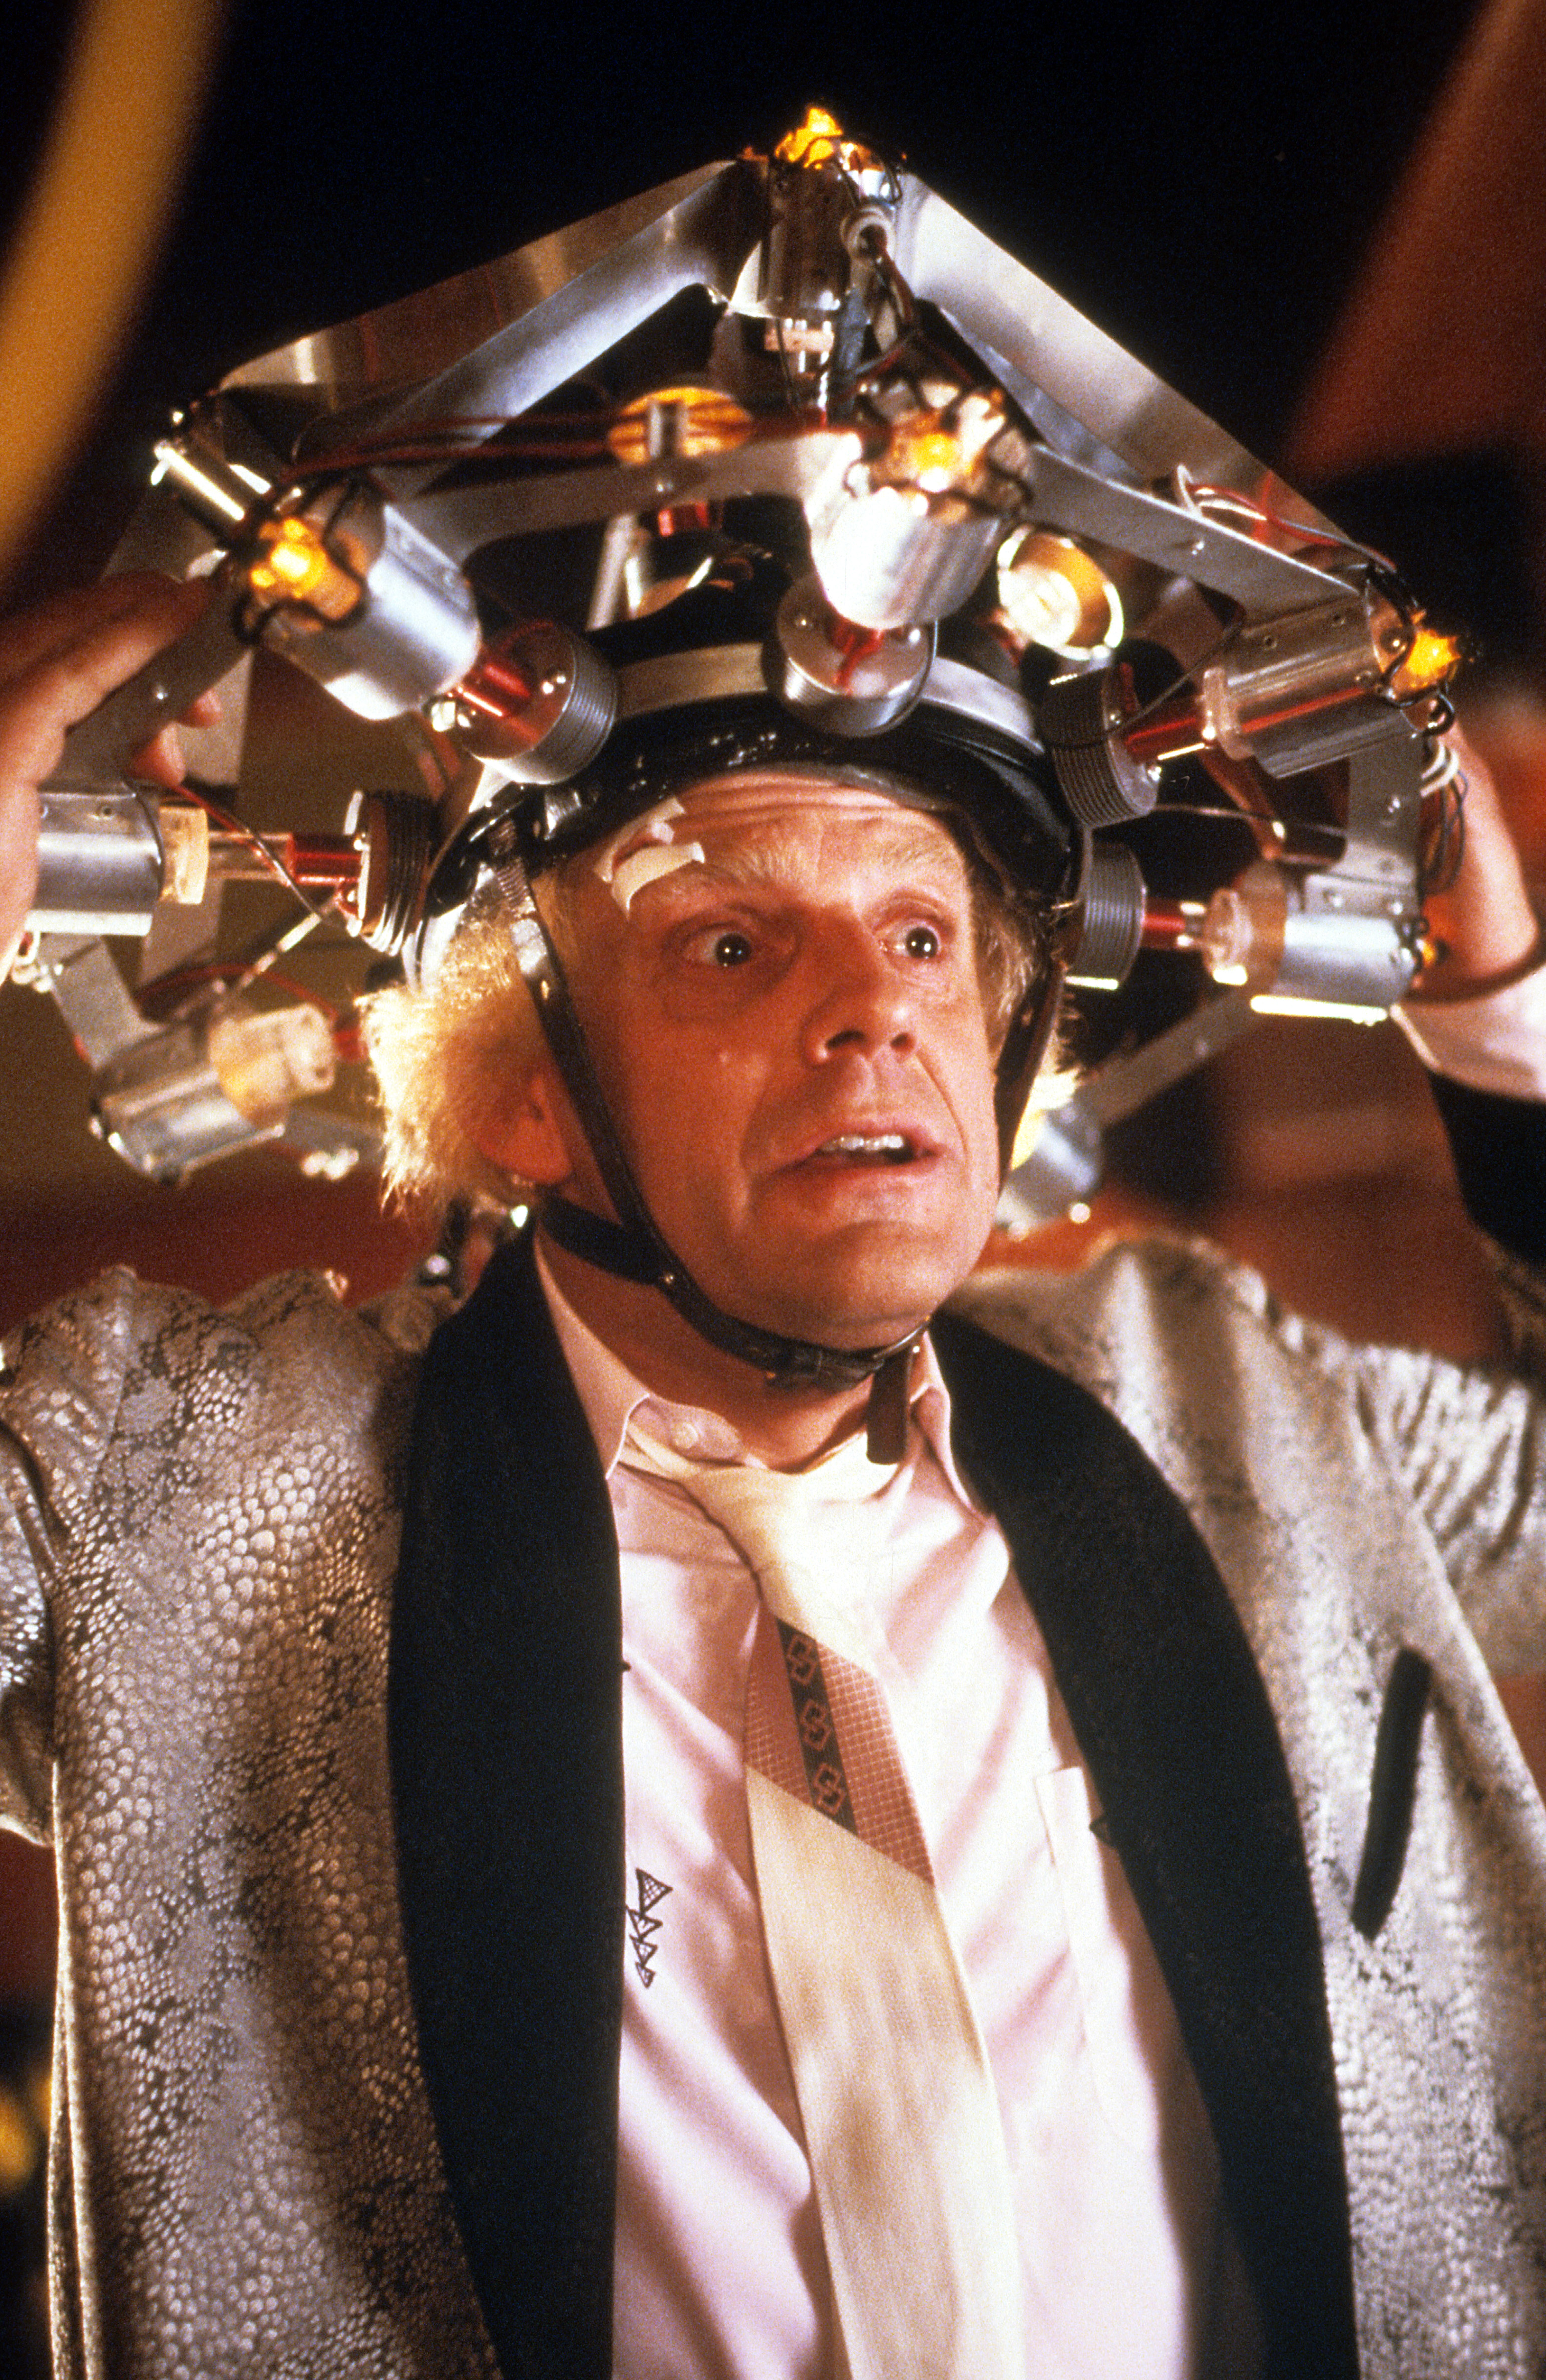 Christopher Lloyd during a scene from the film "Back To The Future" in 1985 | Source: Getty Images